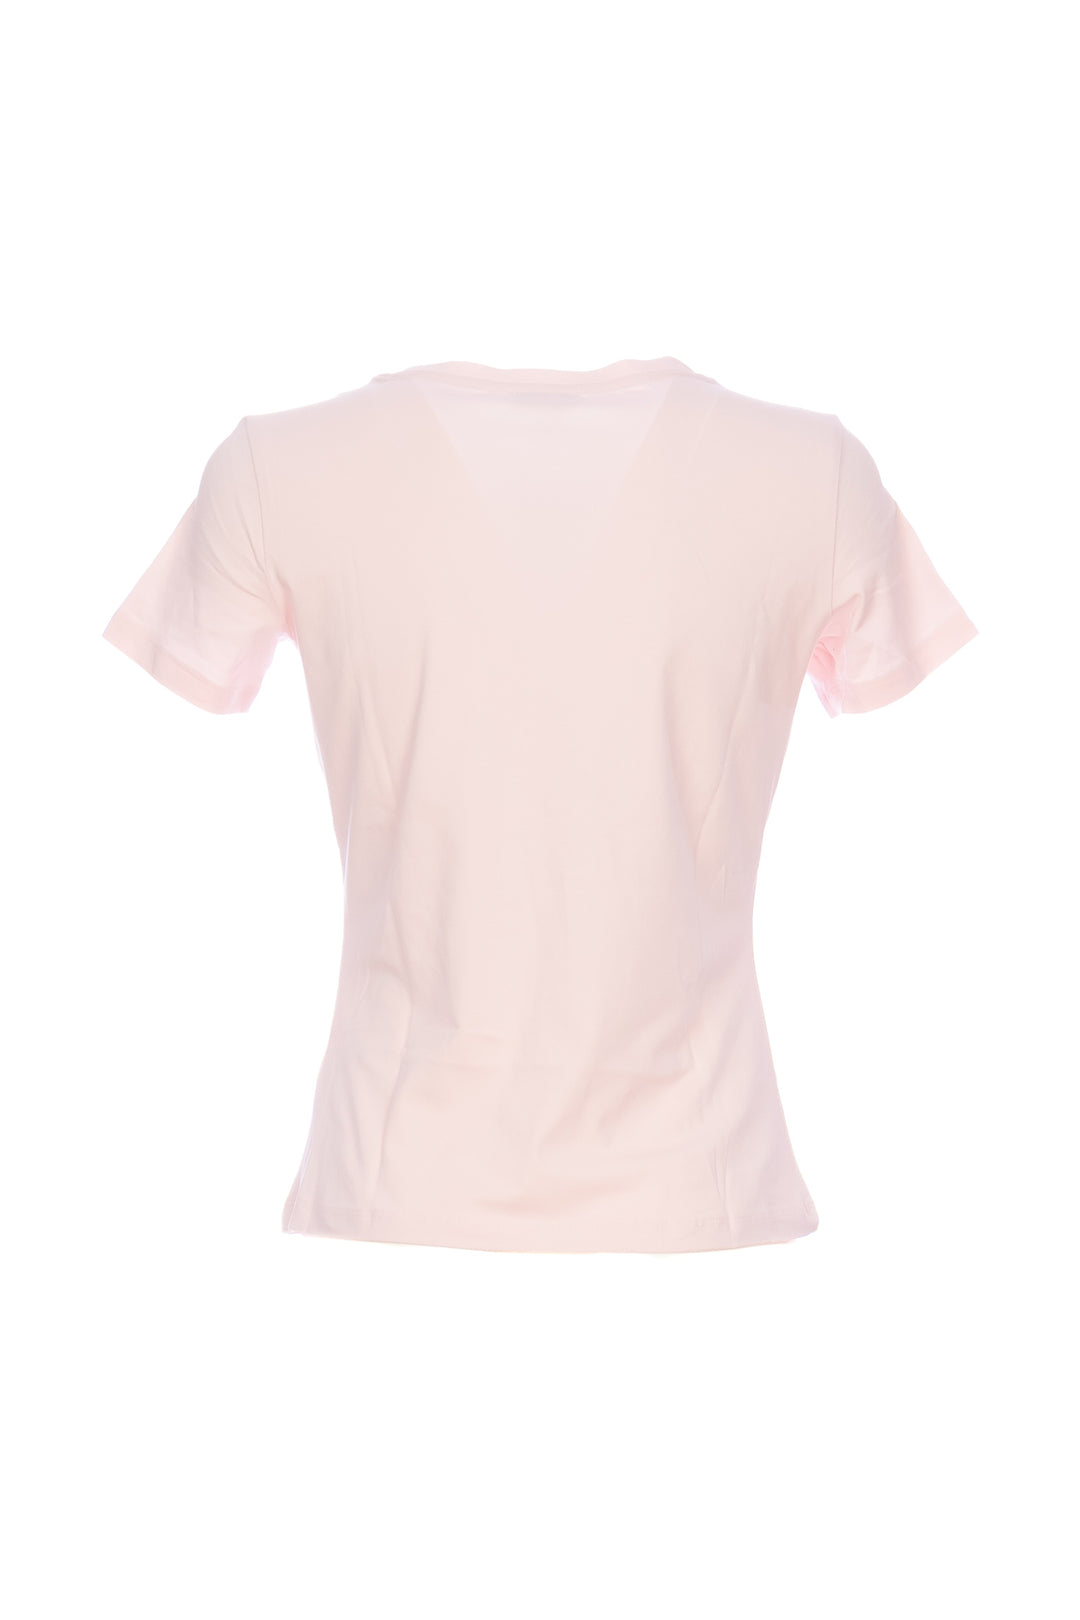 FRACOMINA T-shirt regular rosa in jersey stretch con strass - Mancinelli 1954